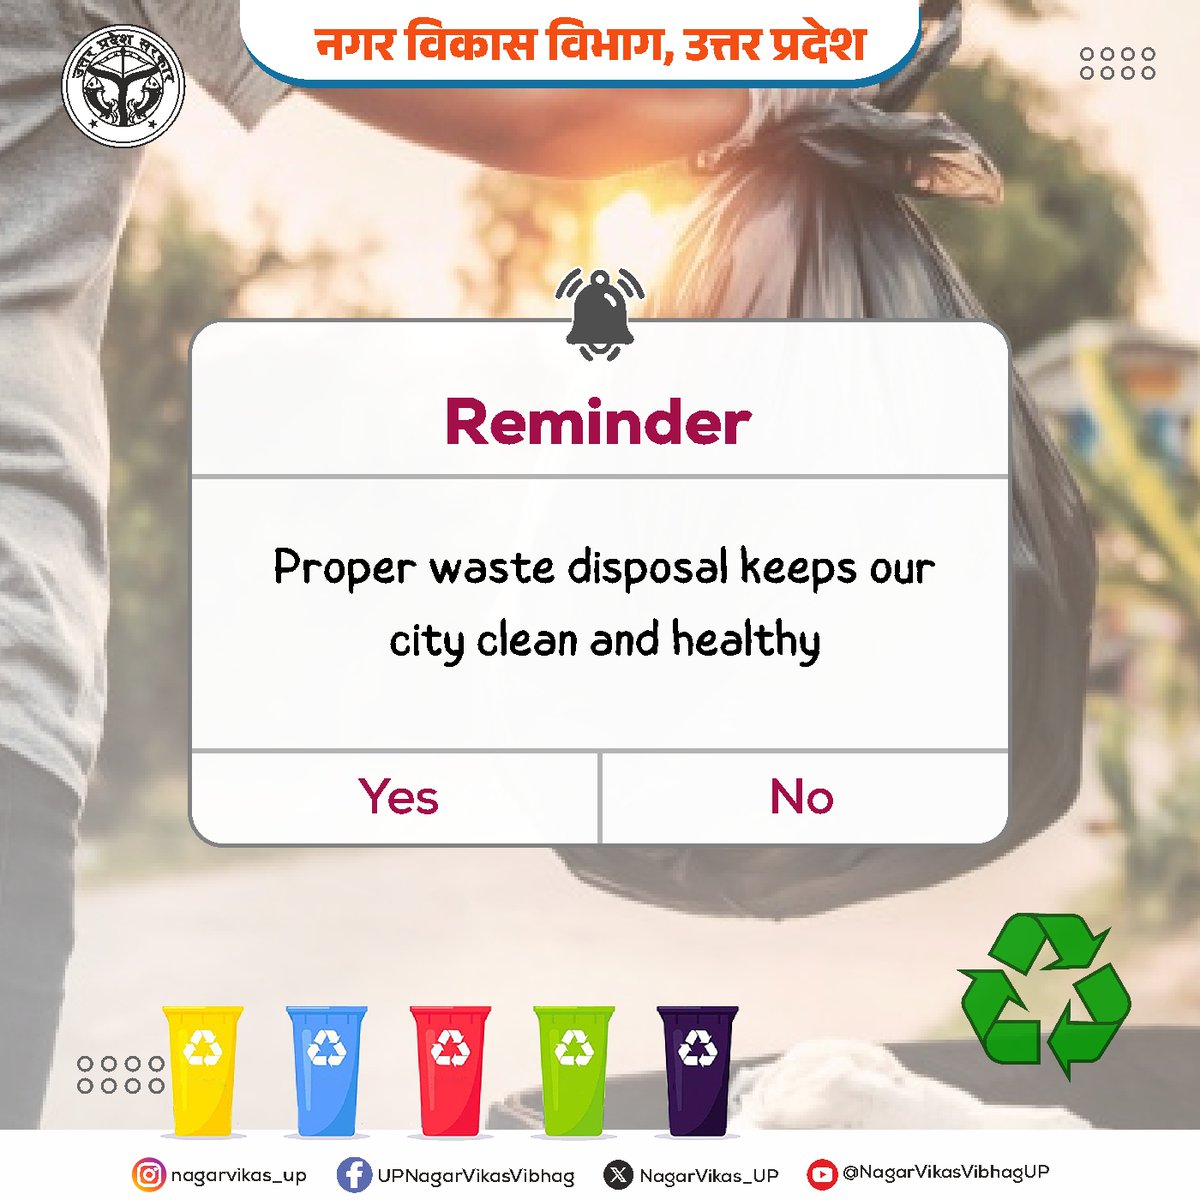 🌟 Reminder! 🌟

Proper waste disposal keeps our city clean and healthy. 🌍🗑️ 

Let's all do our part!

Are you with us? ✅ Yes or ❌ No

#CleanCity #HealthyCity #WasteManagement #NagarVikasVibhagUP #SwachhBharat #SustainableLiving